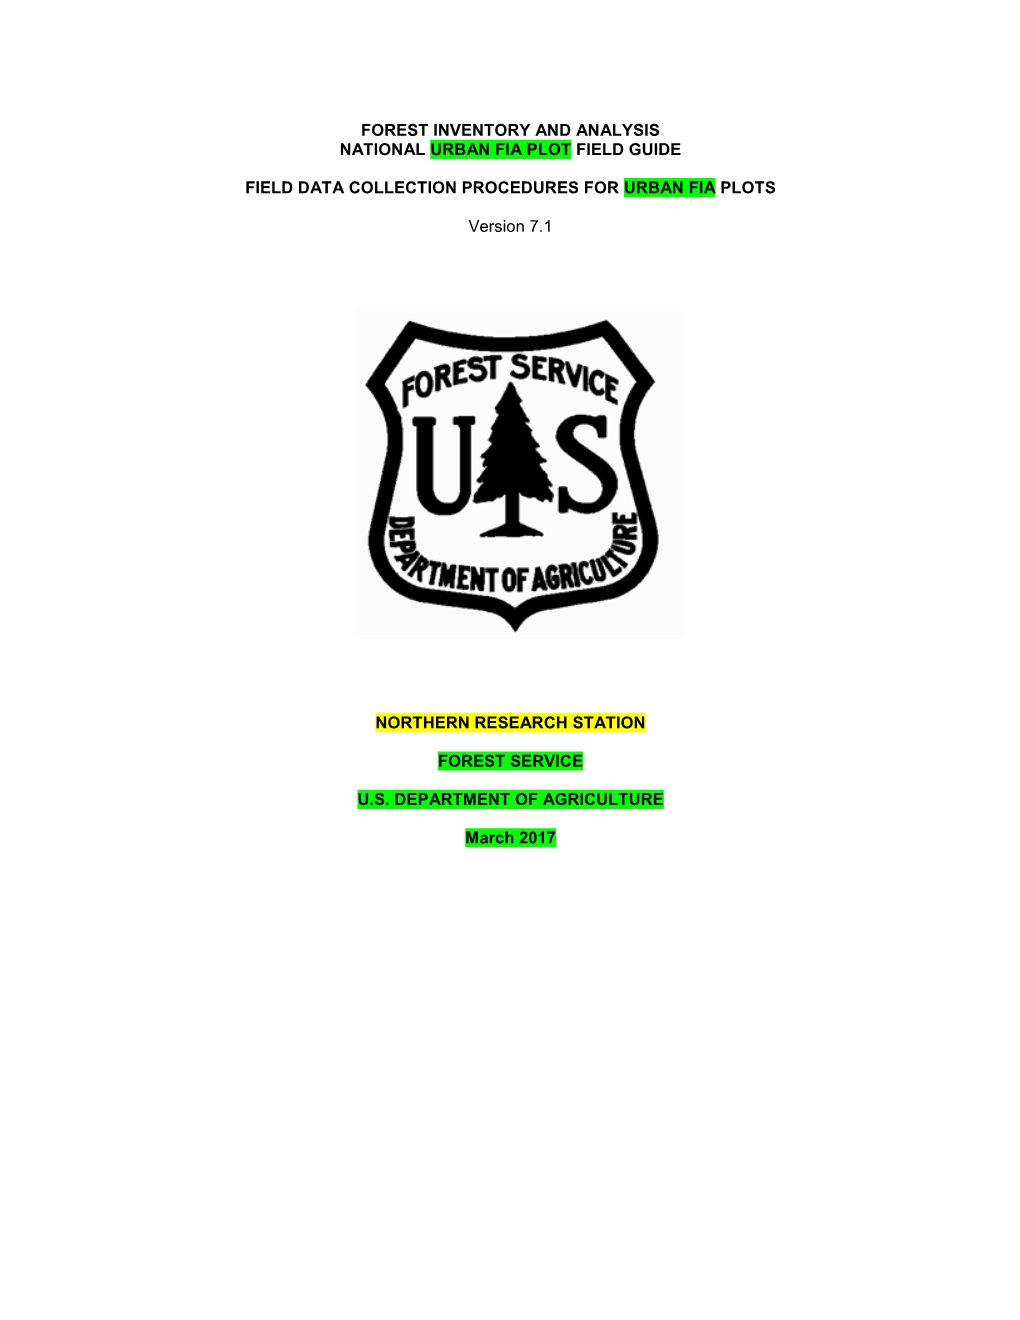 FOREST INVENTORY and ANALYSIS NATIONAL URBAN FIA PLOT FIELD GUIDE FIELD DATA COLLECTION PROCEDURES for URBAN FIA PLOTS Version 7